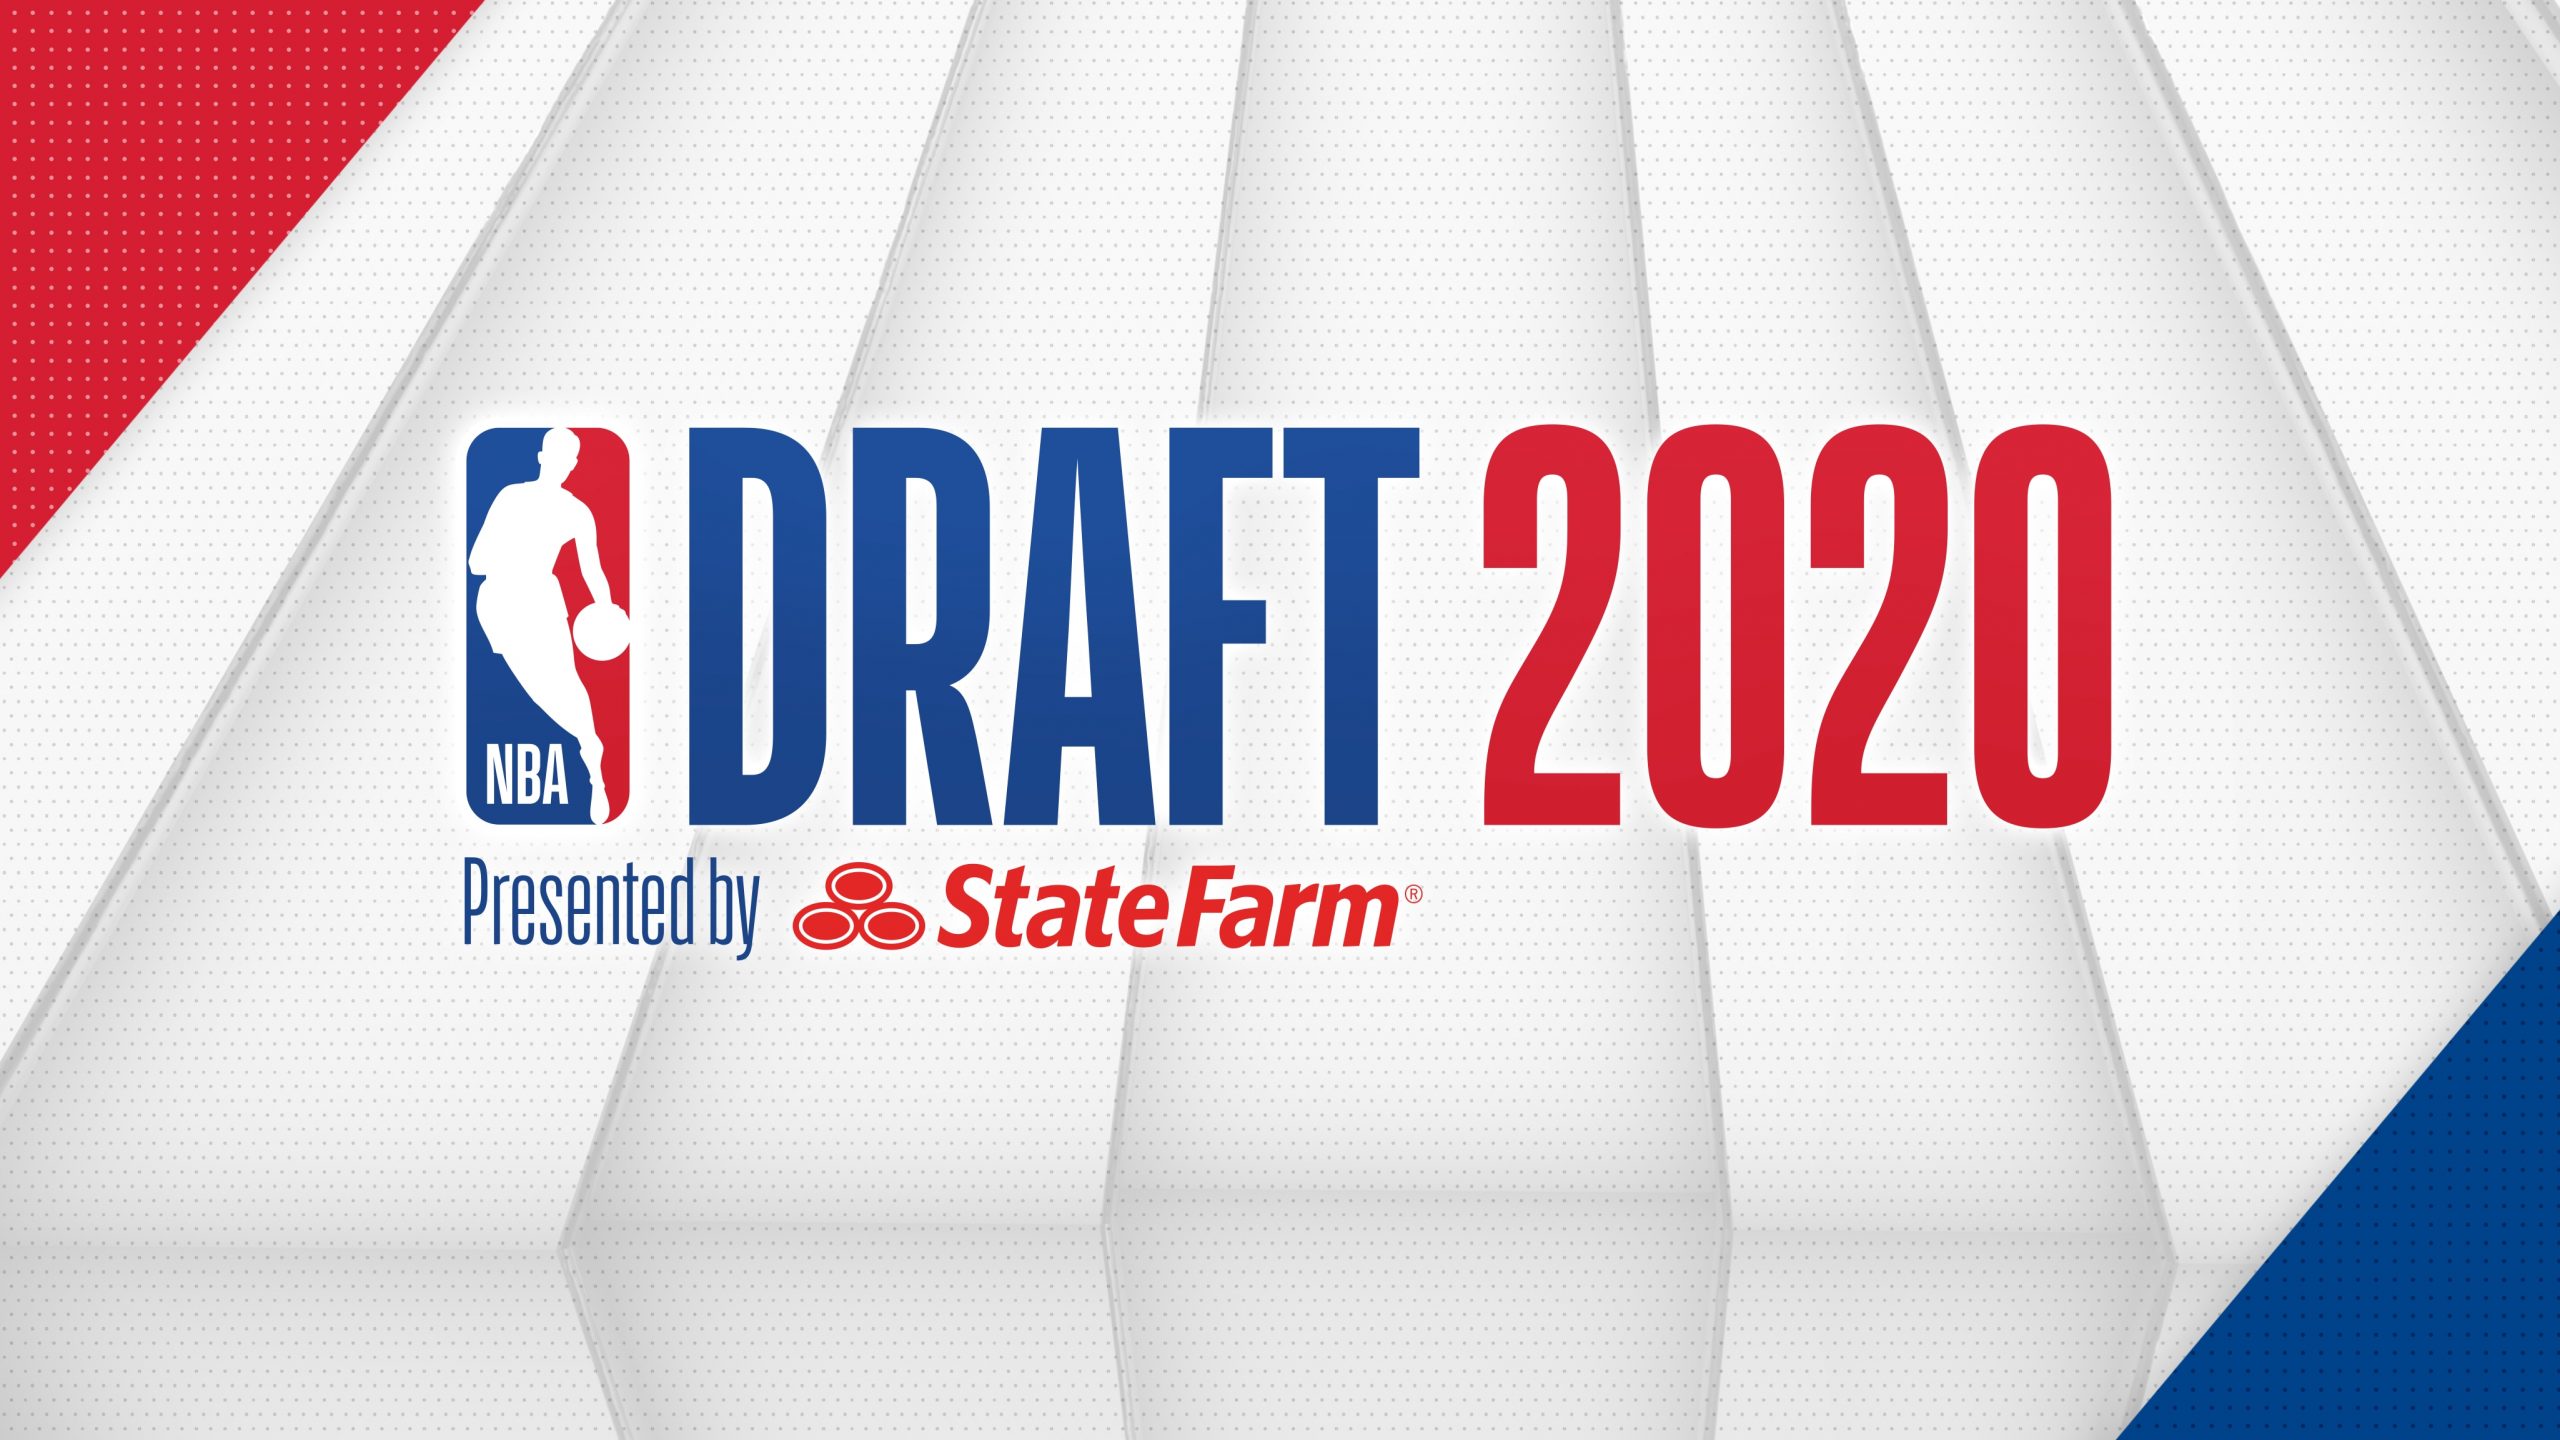 James Wiseman Is Selected #2 In the 2020 NBA Draft! 